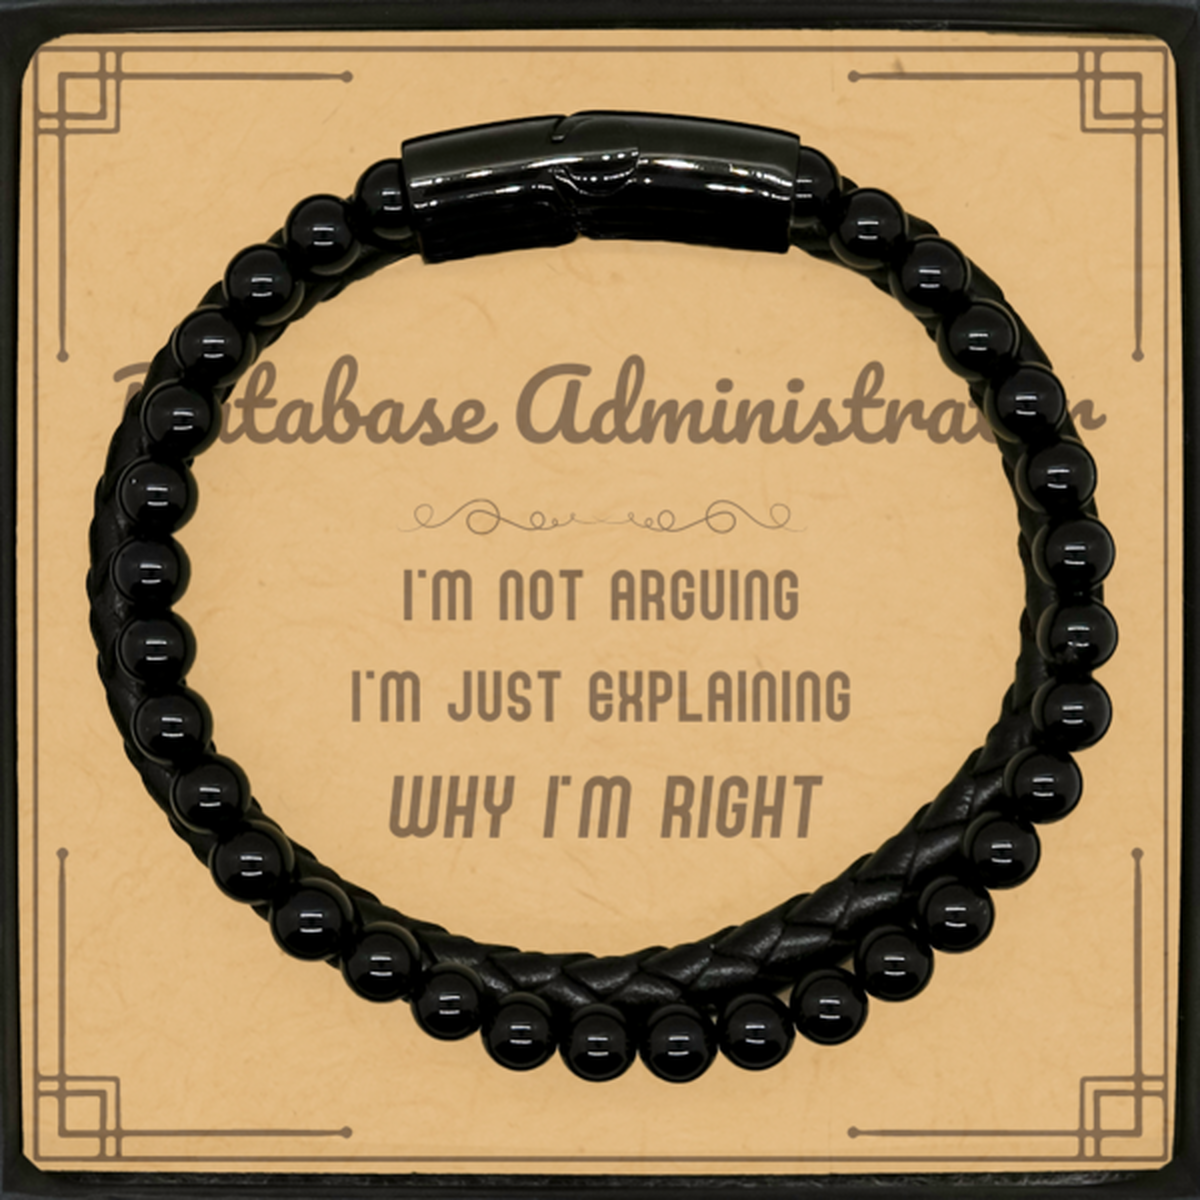 Database Administrator I'm not Arguing. I'm Just Explaining Why I'm RIGHT Stone Leather Bracelets, Funny Saying Quote Database Administrator Gifts For Database Administrator Message Card Graduation Birthday Christmas Gifts for Men Women Coworker